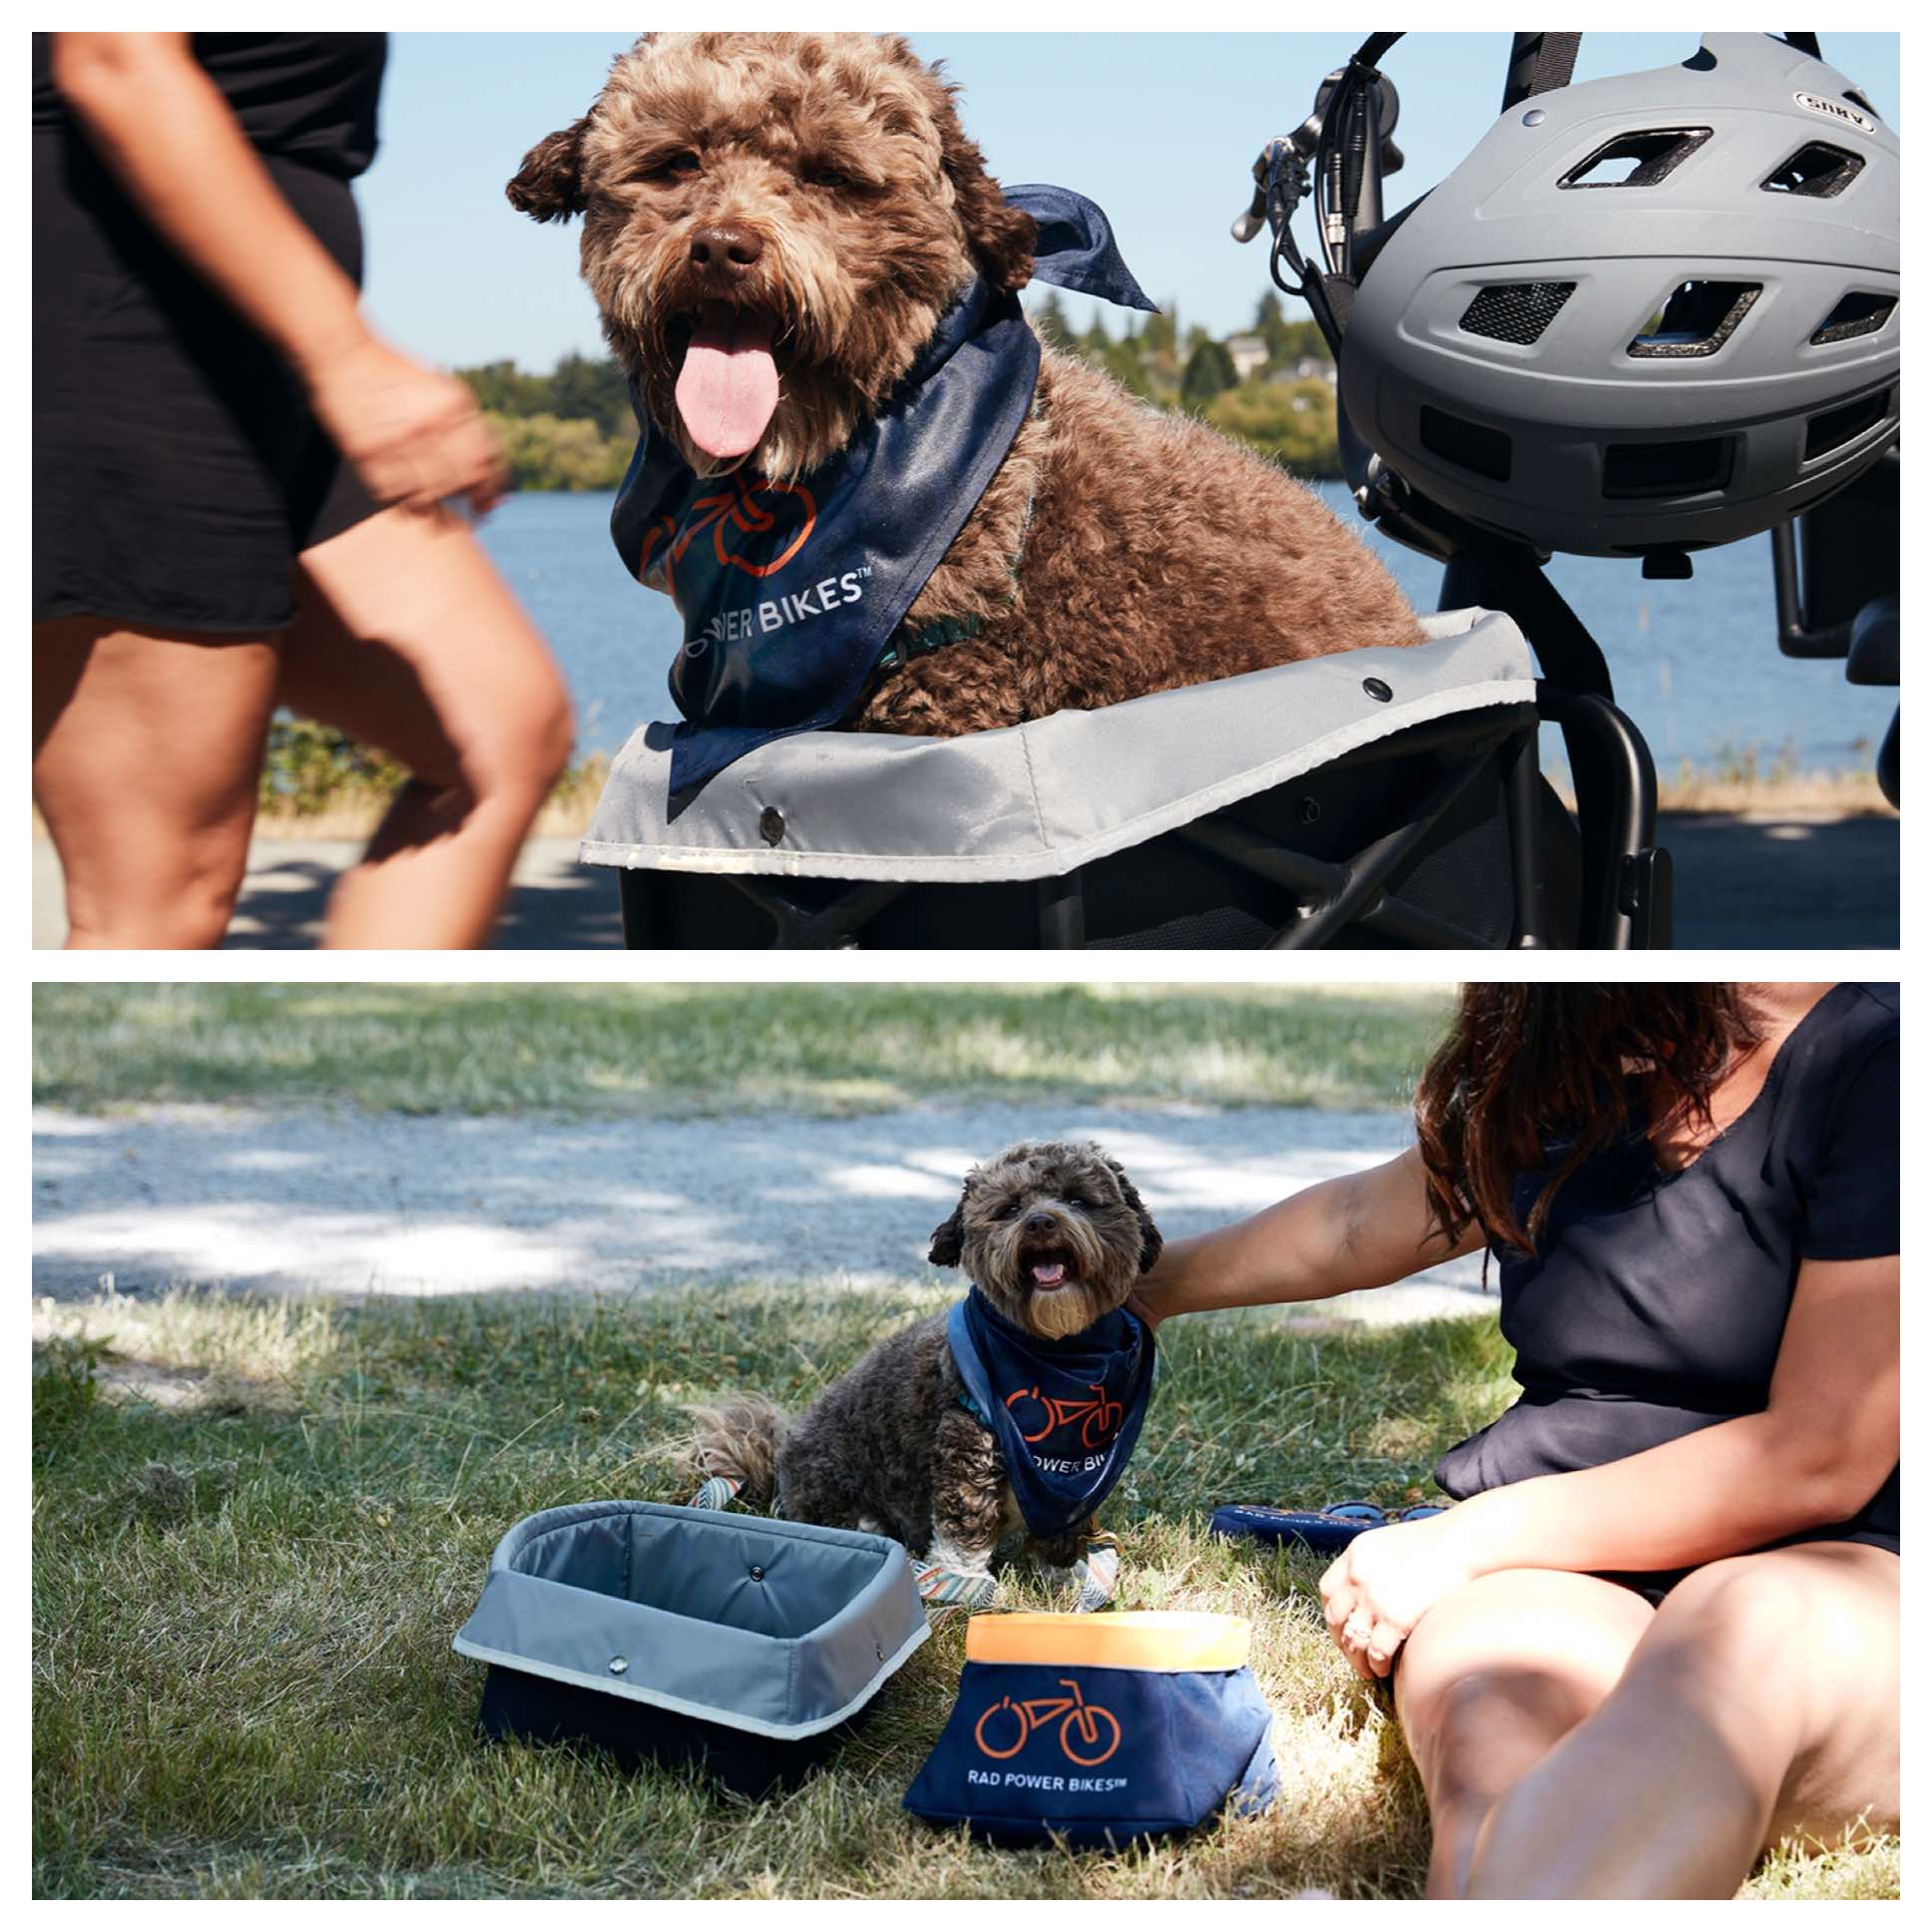 Two pictures of small dog, one where he is nestled in Rad's new pet carrier and the other where he is by the Rad Power Bikes portable water dish.